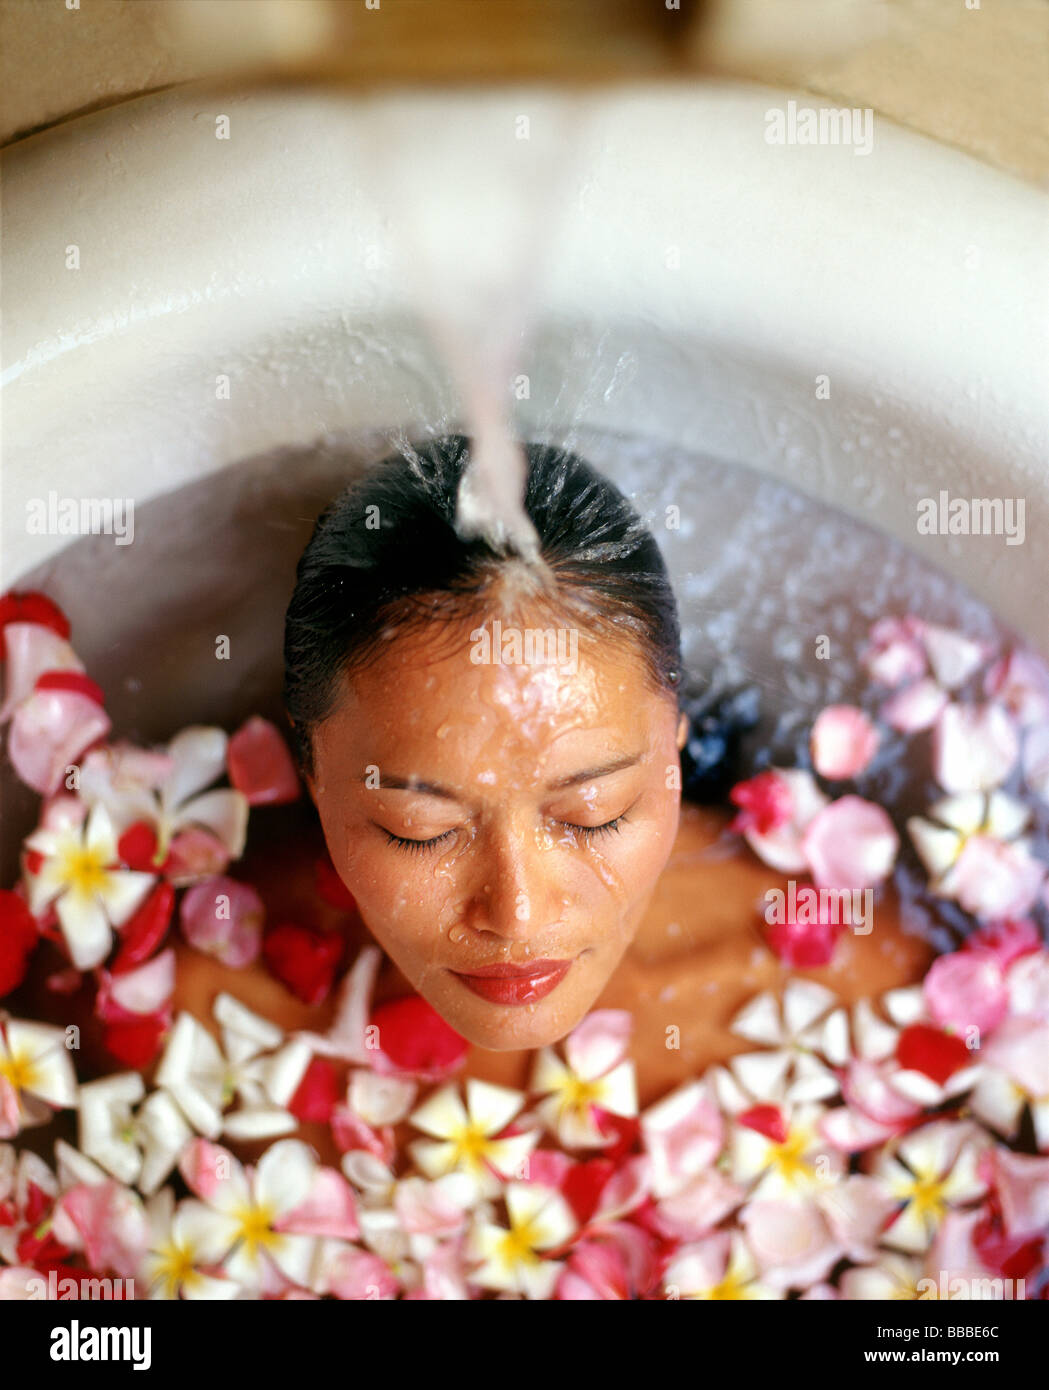 Stock Photo - Woman in bath with floating flowers, head under <b>running water</b> - woman-in-bath-with-floating-flowers-head-under-running-water-BBBE6C